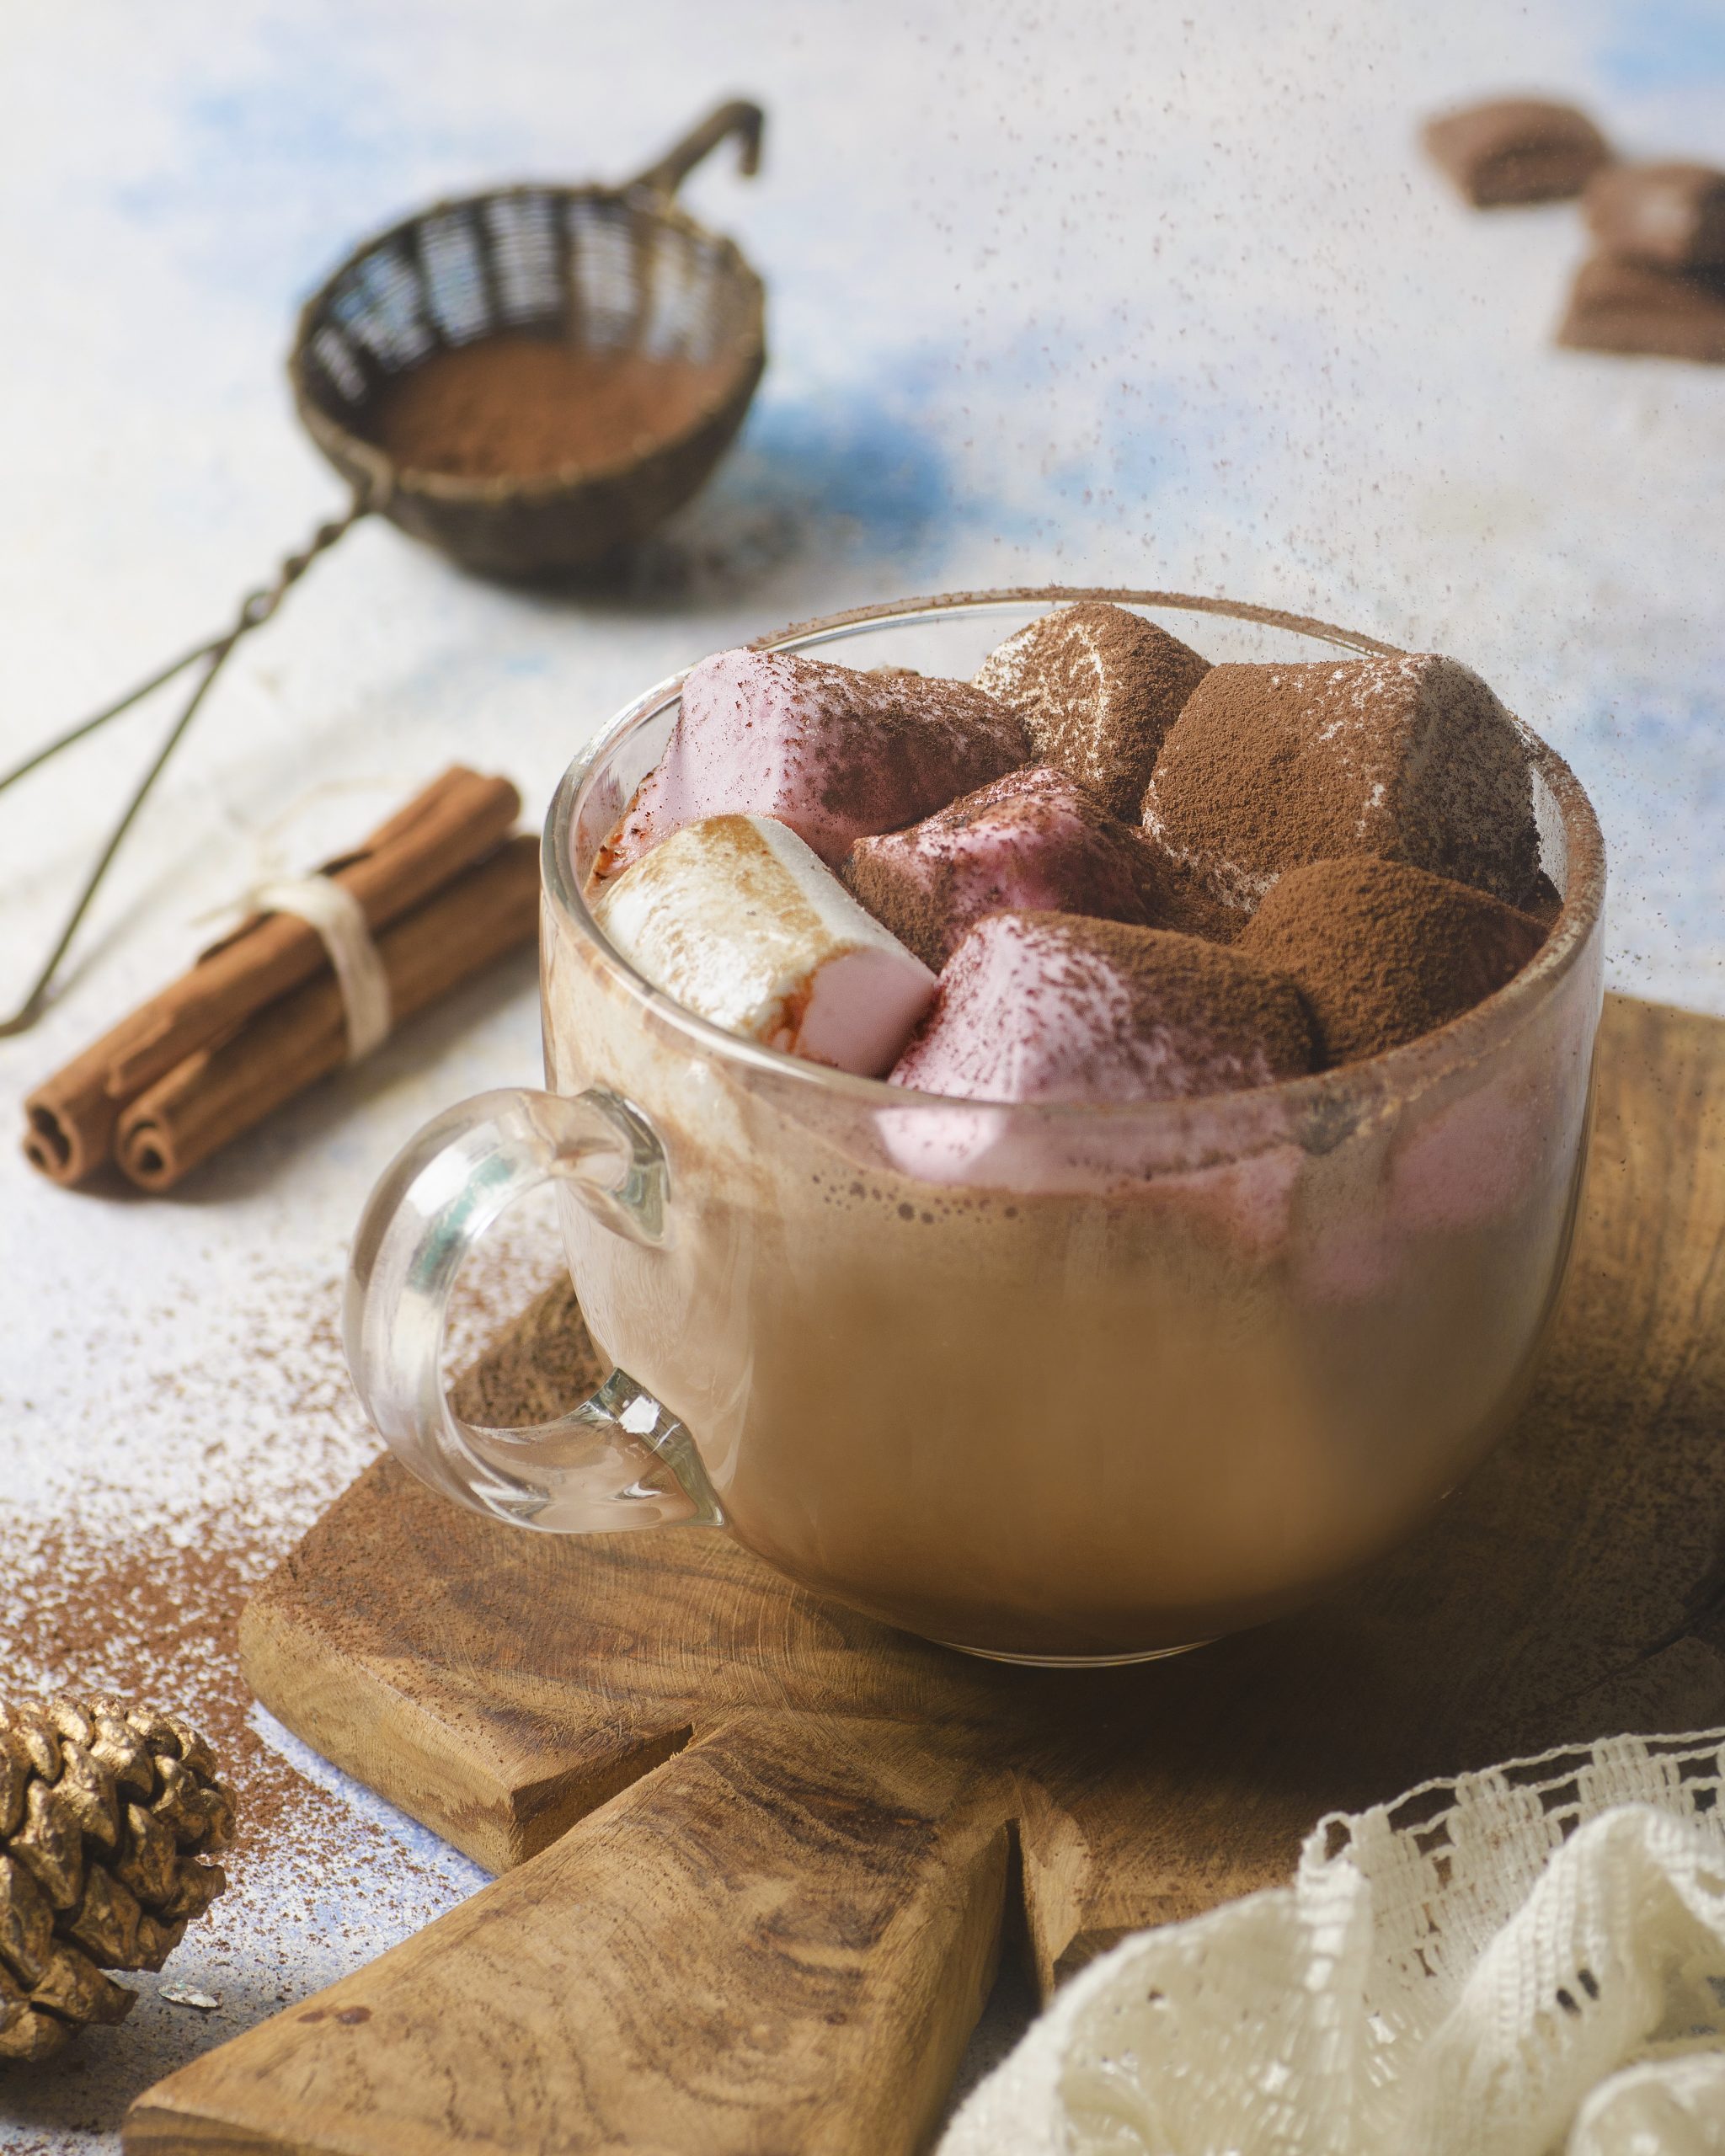 Cinnamon, nutmeg and paprika, combined with cocoa powder, coconut sugar and vanilla to give you the right winter warmth